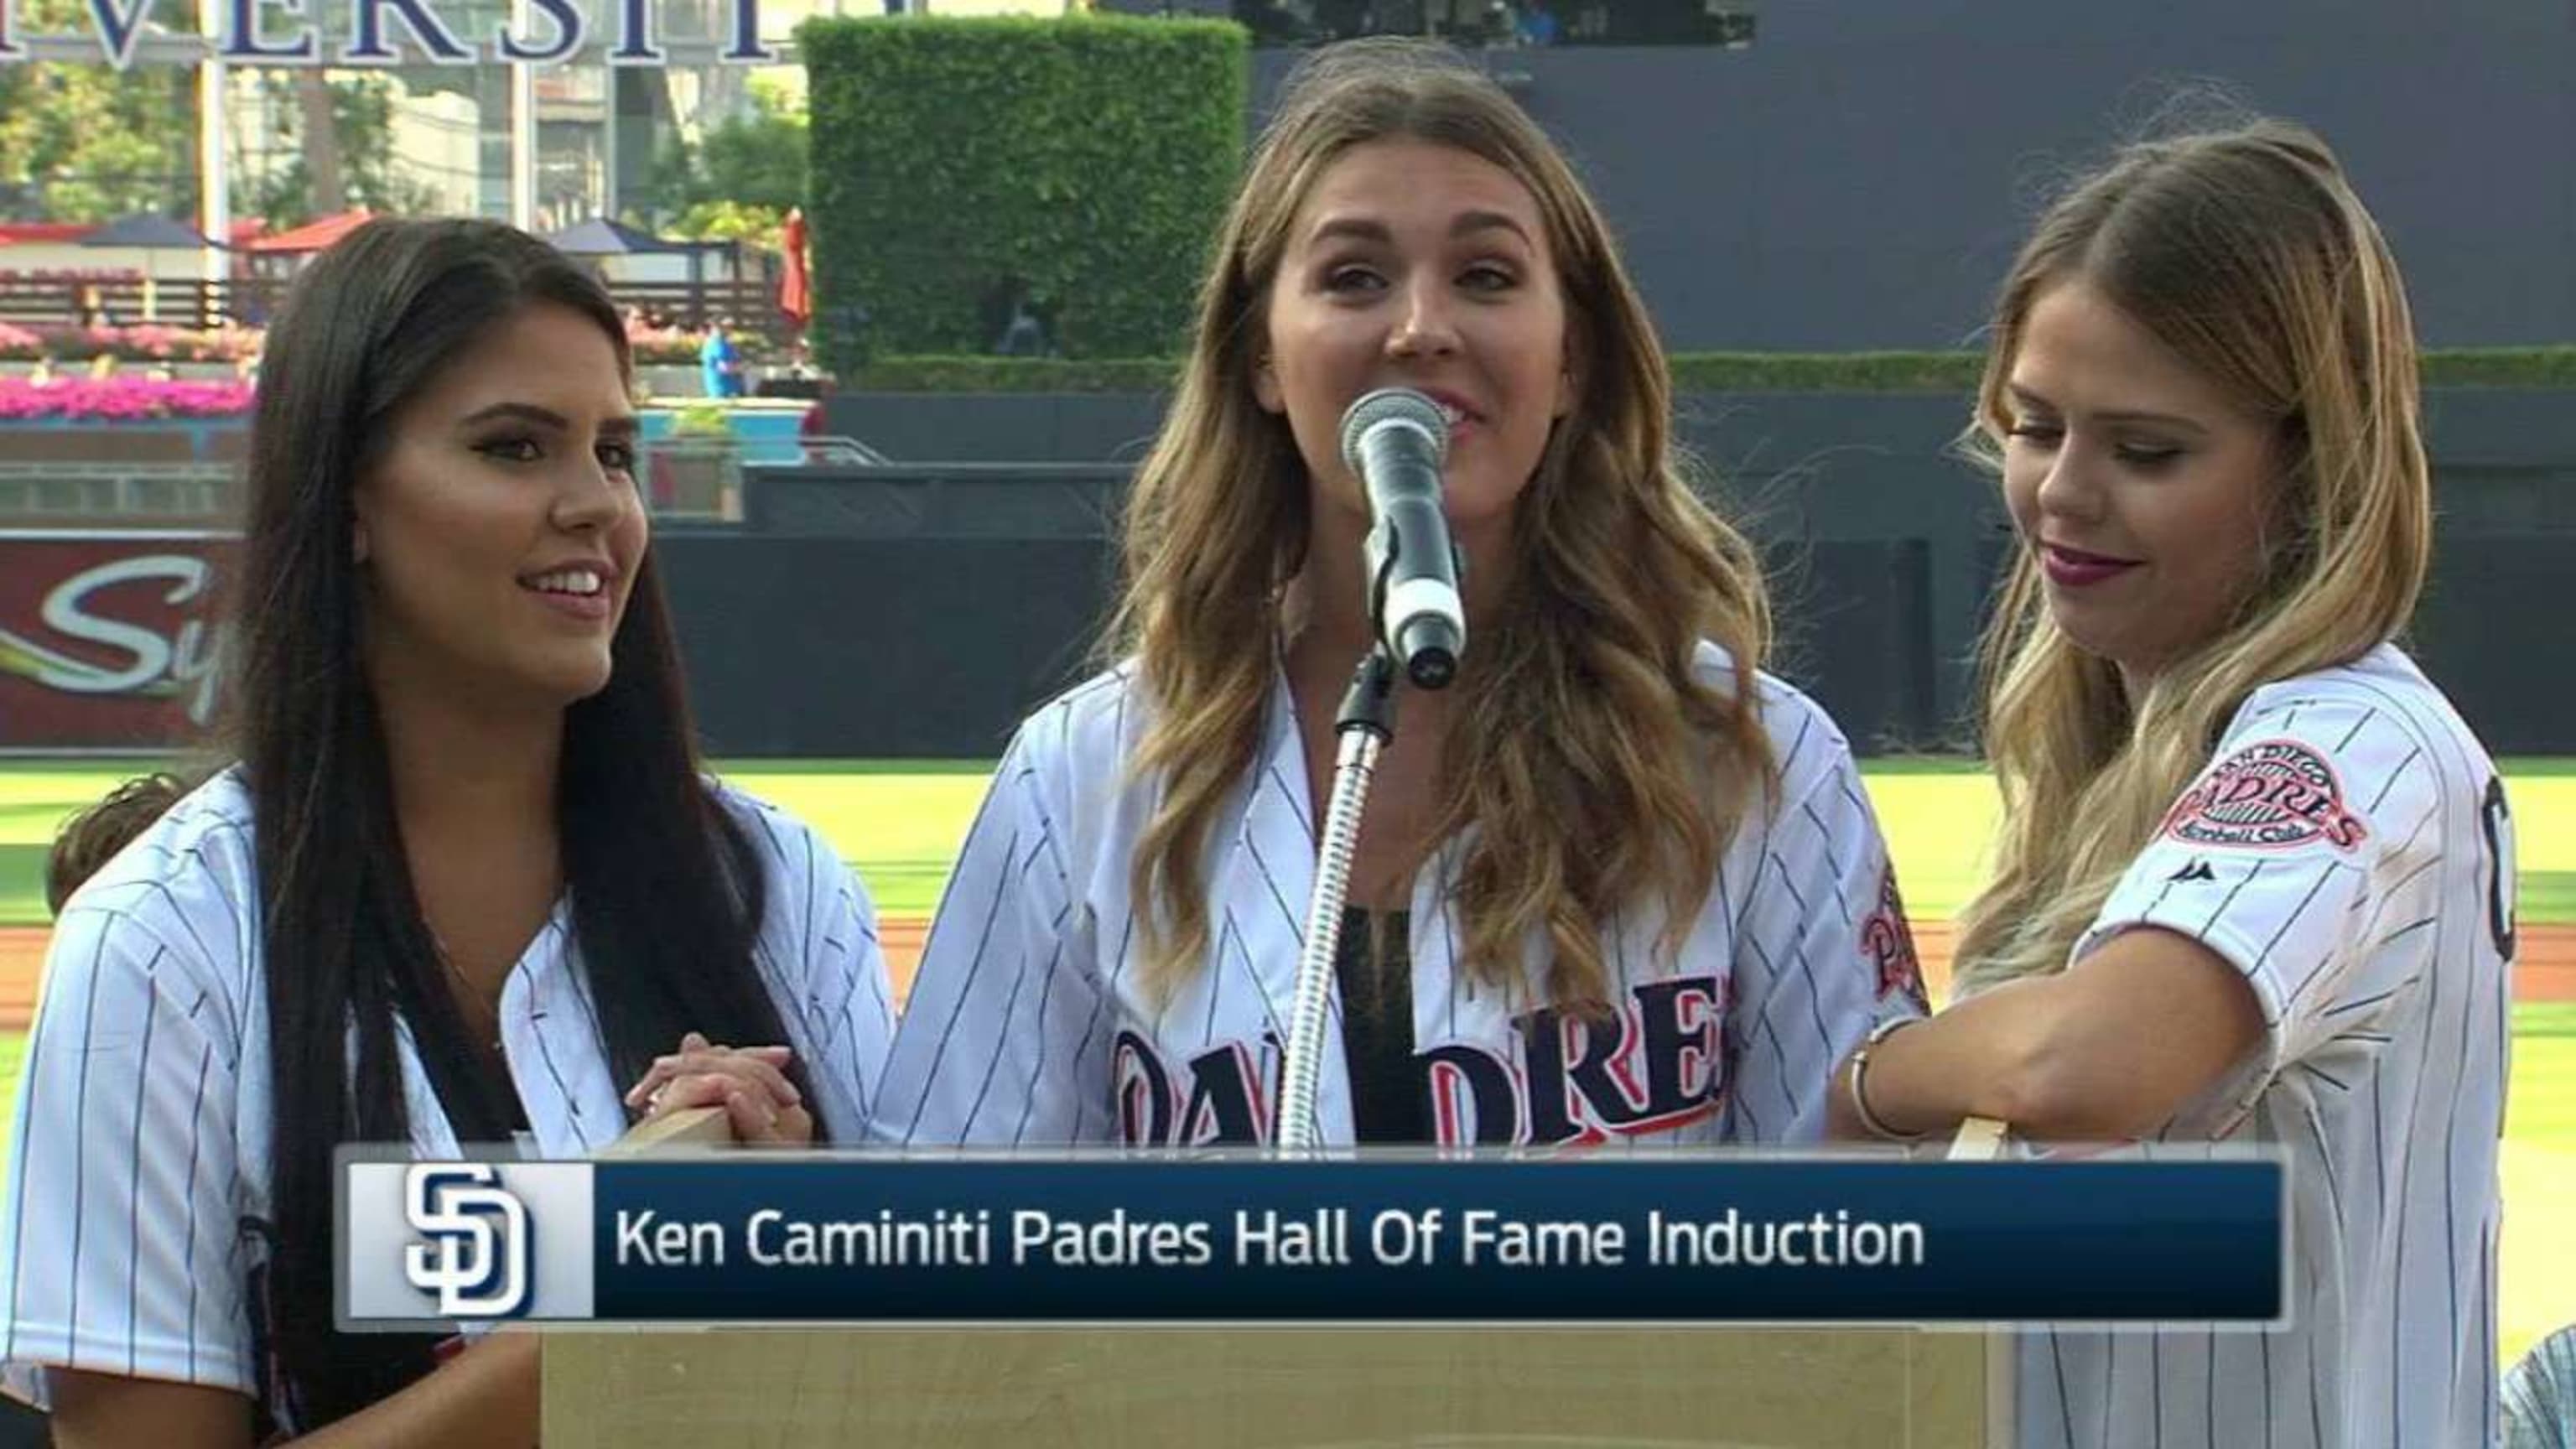 Padres Induct Ken Caminiti into Padres Hall of Fame